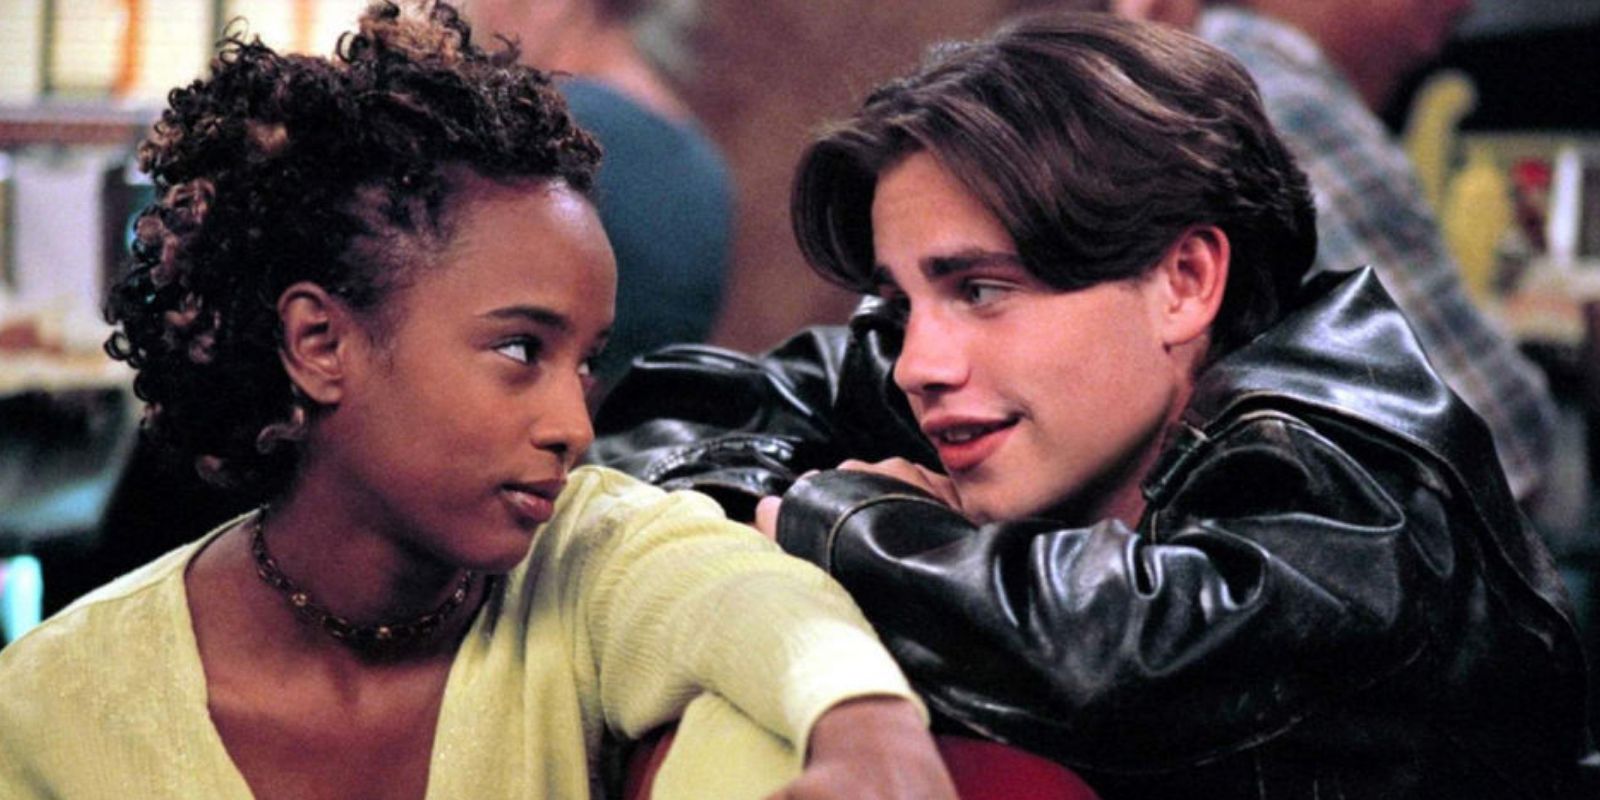 Boy Meets World: Why Shawn & Angela Didn't End Up Together